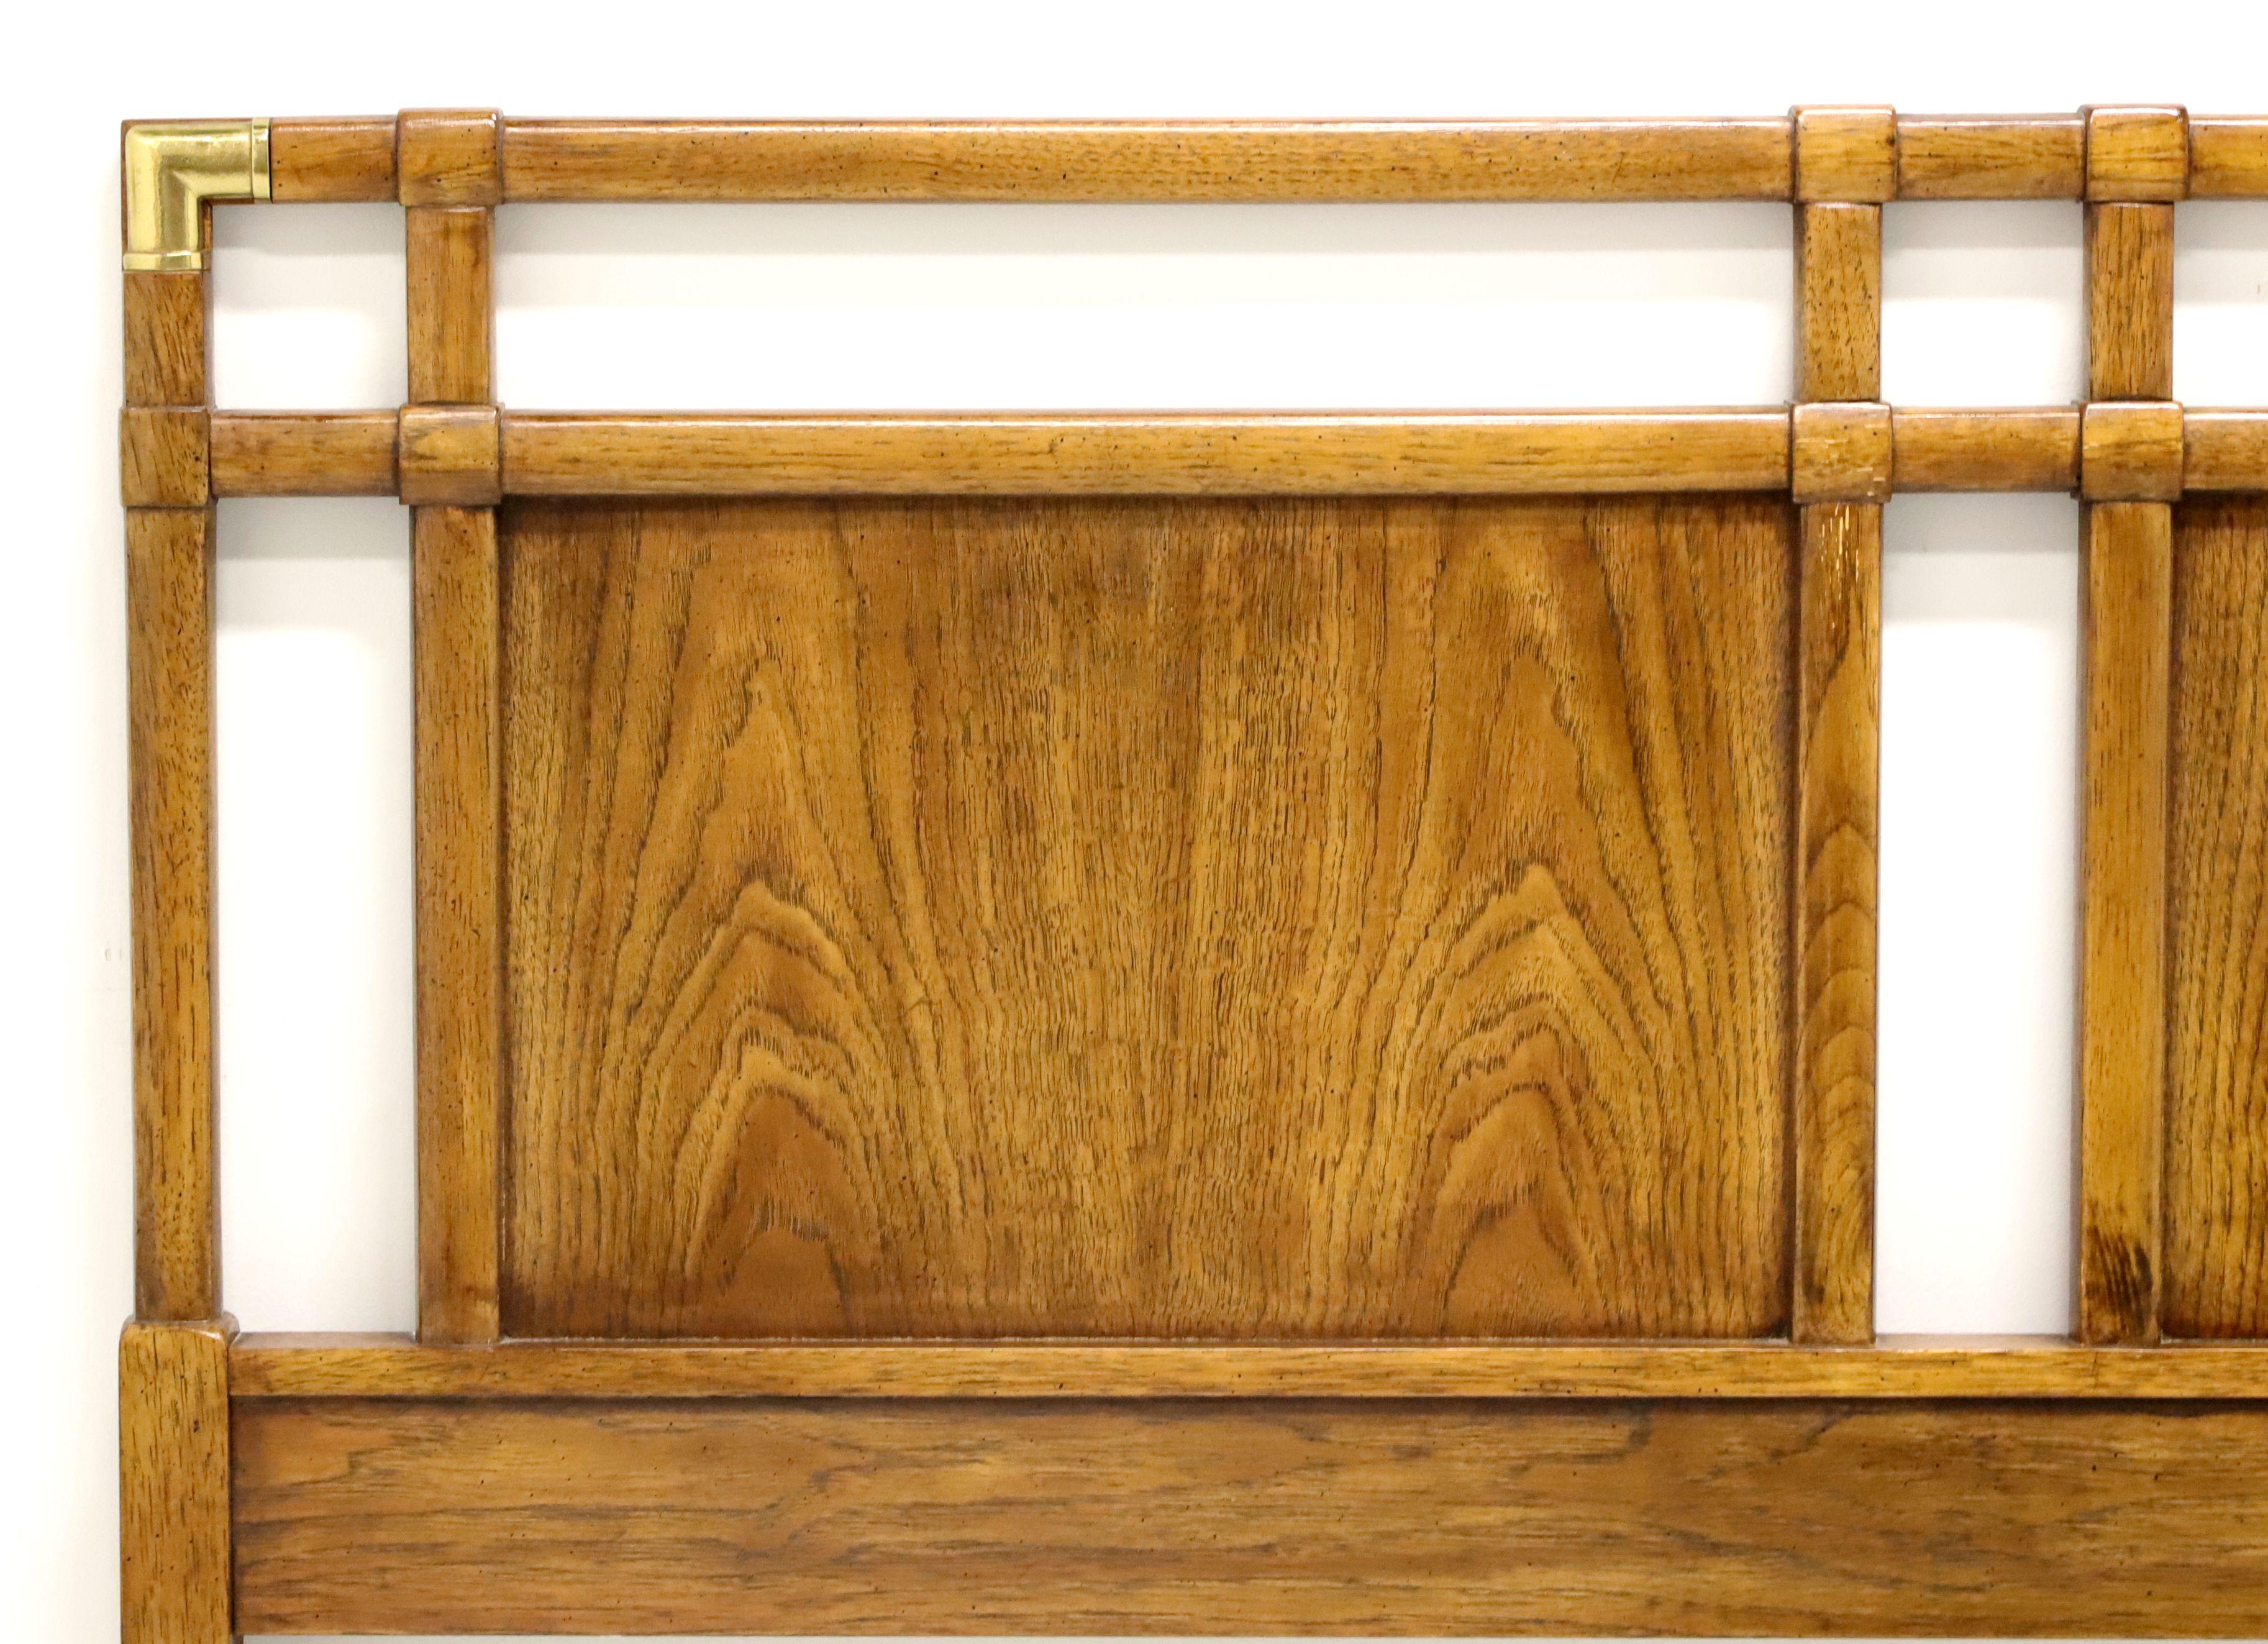 A Campaign style queen size headboard by Drexel Heritage, from their Accolade Collection. Pecan with decorative brass corner accents. Made in North Carolina, USA, circa 1985. 

Style #: 904-562-2

Measures: 60.25 W 1.75 D 43.25